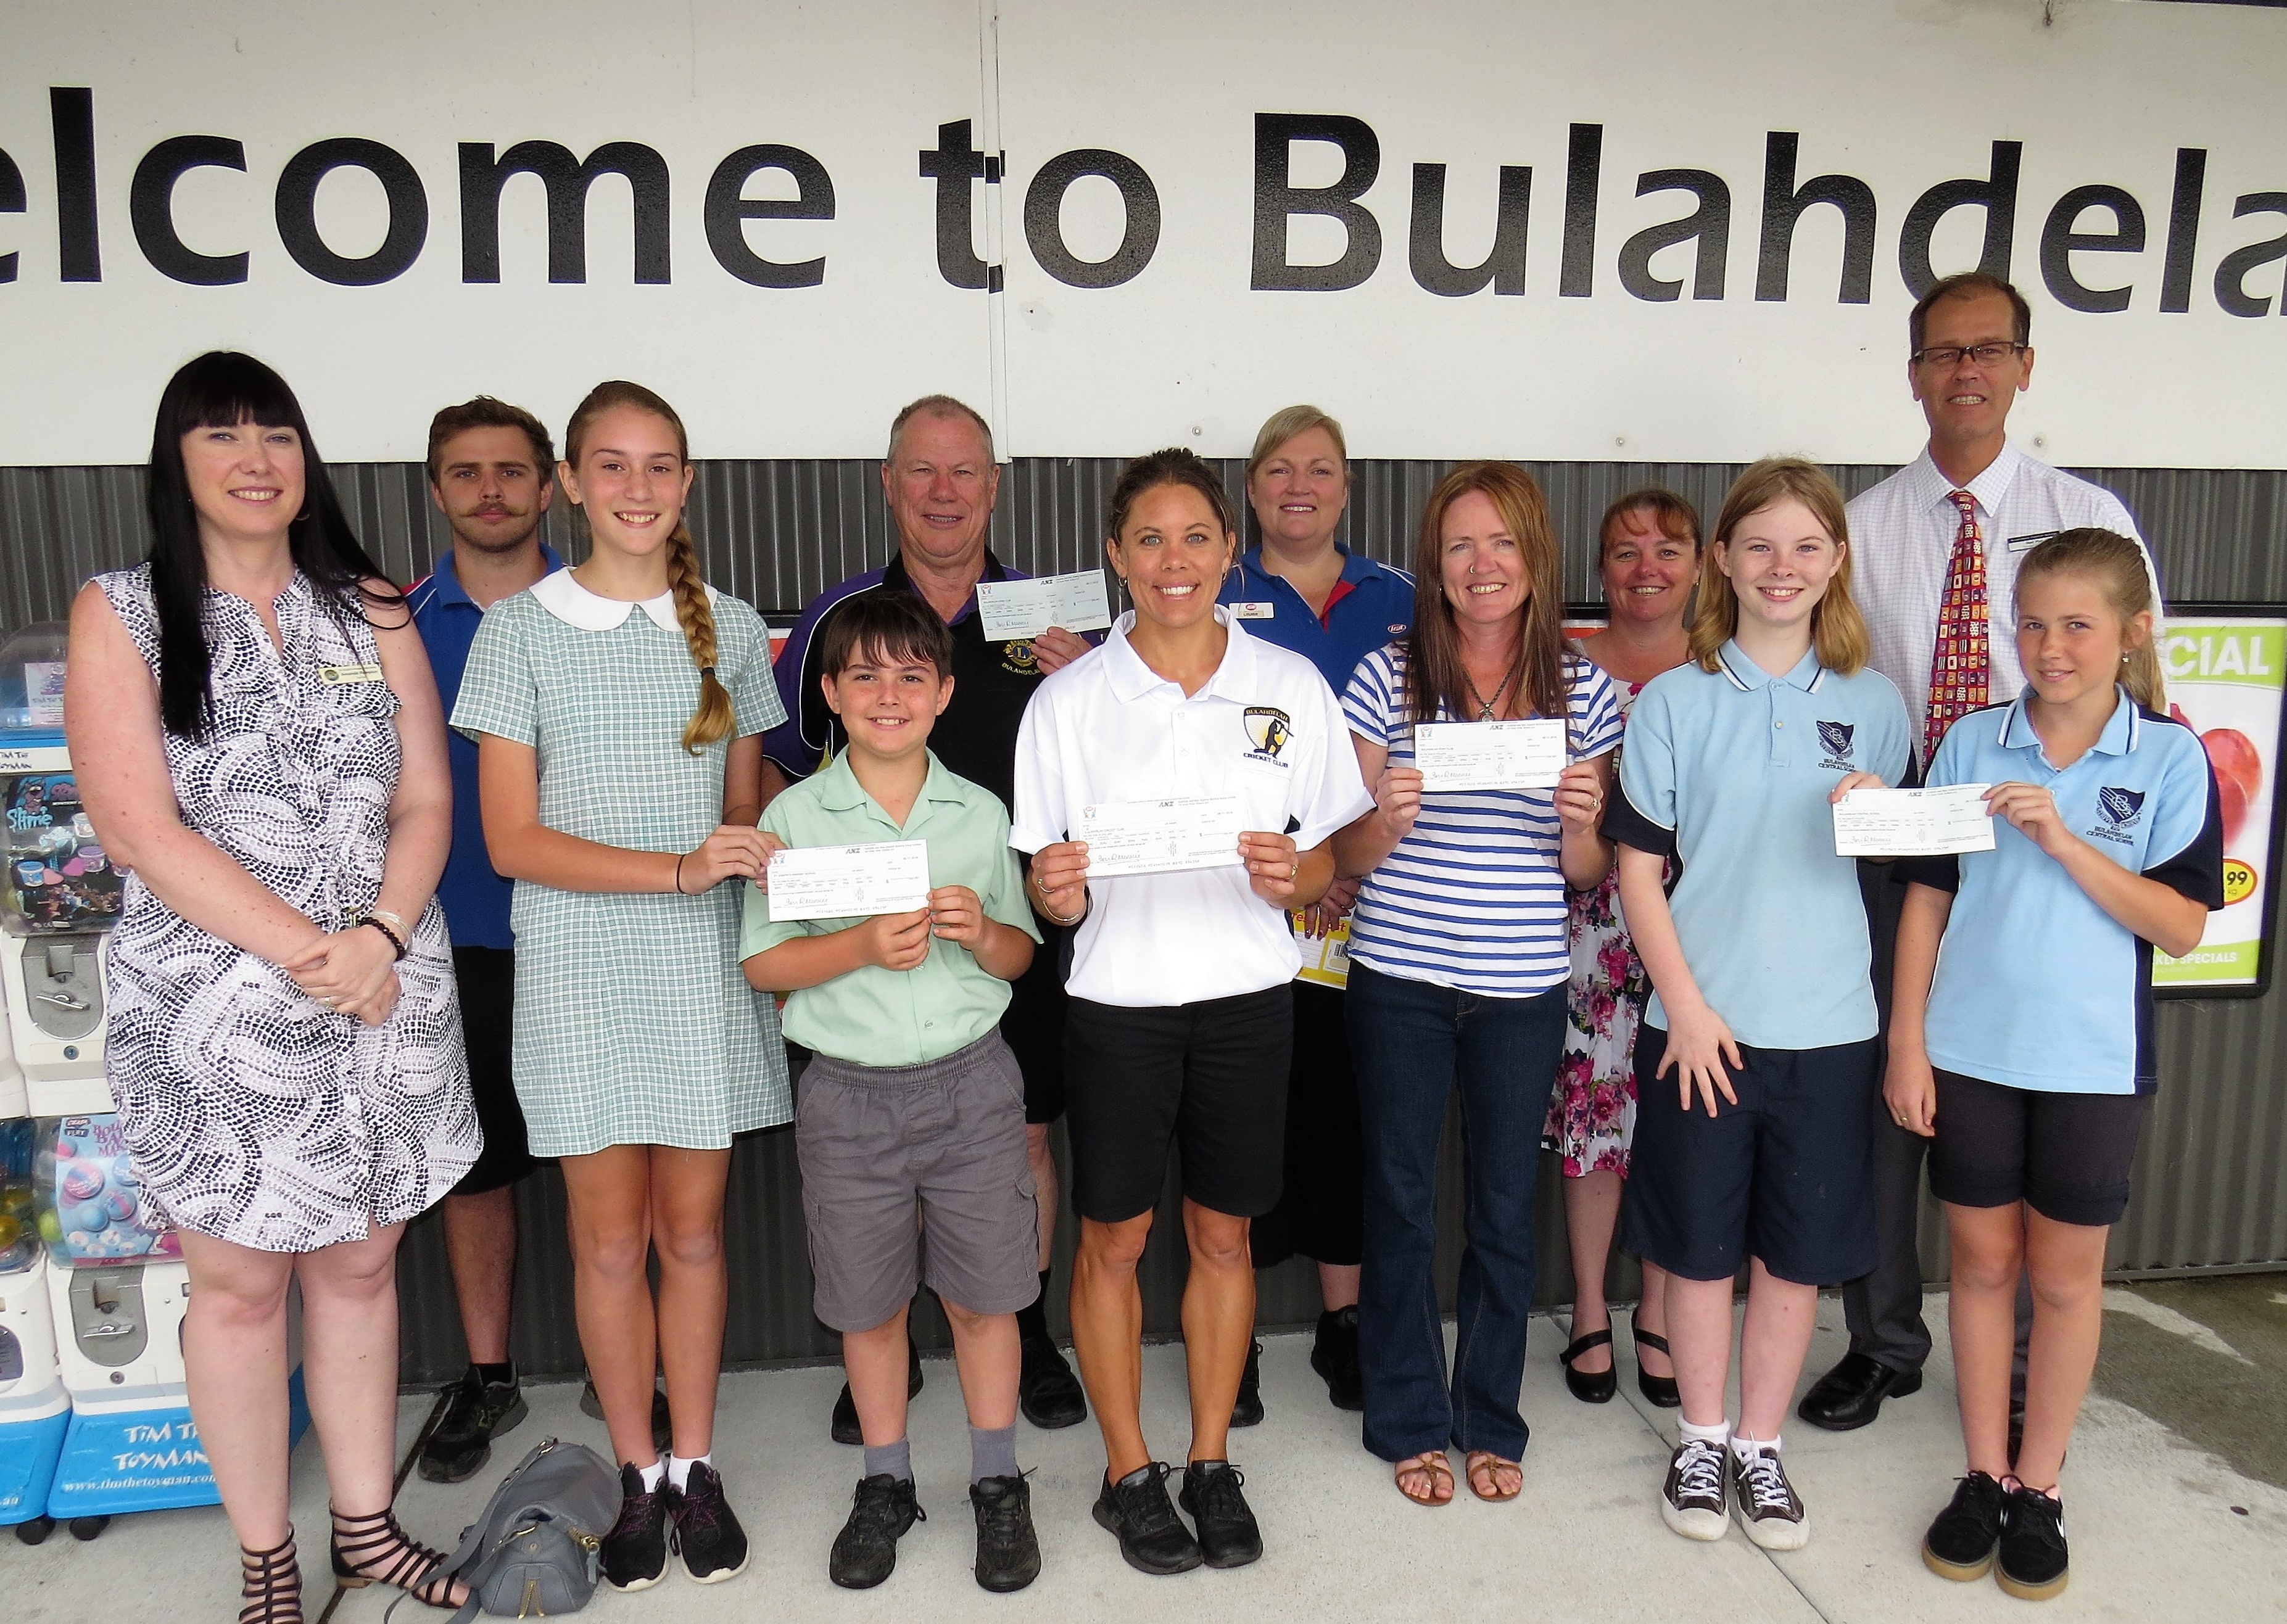 WITH THANKS: St Joseph’s Amanda Pomplun, IGA’s Tom Weippeart, students Seren Everingham and Connor Baker, Lions President Roger Dixon, Cricket Club’s Erin Matheson, IGA Supervisor Louise Dorney, Pony Club President Alicia Madden with Deb Gilbert, Rod Pye, Claire Terry and Olivia Smith from BCS